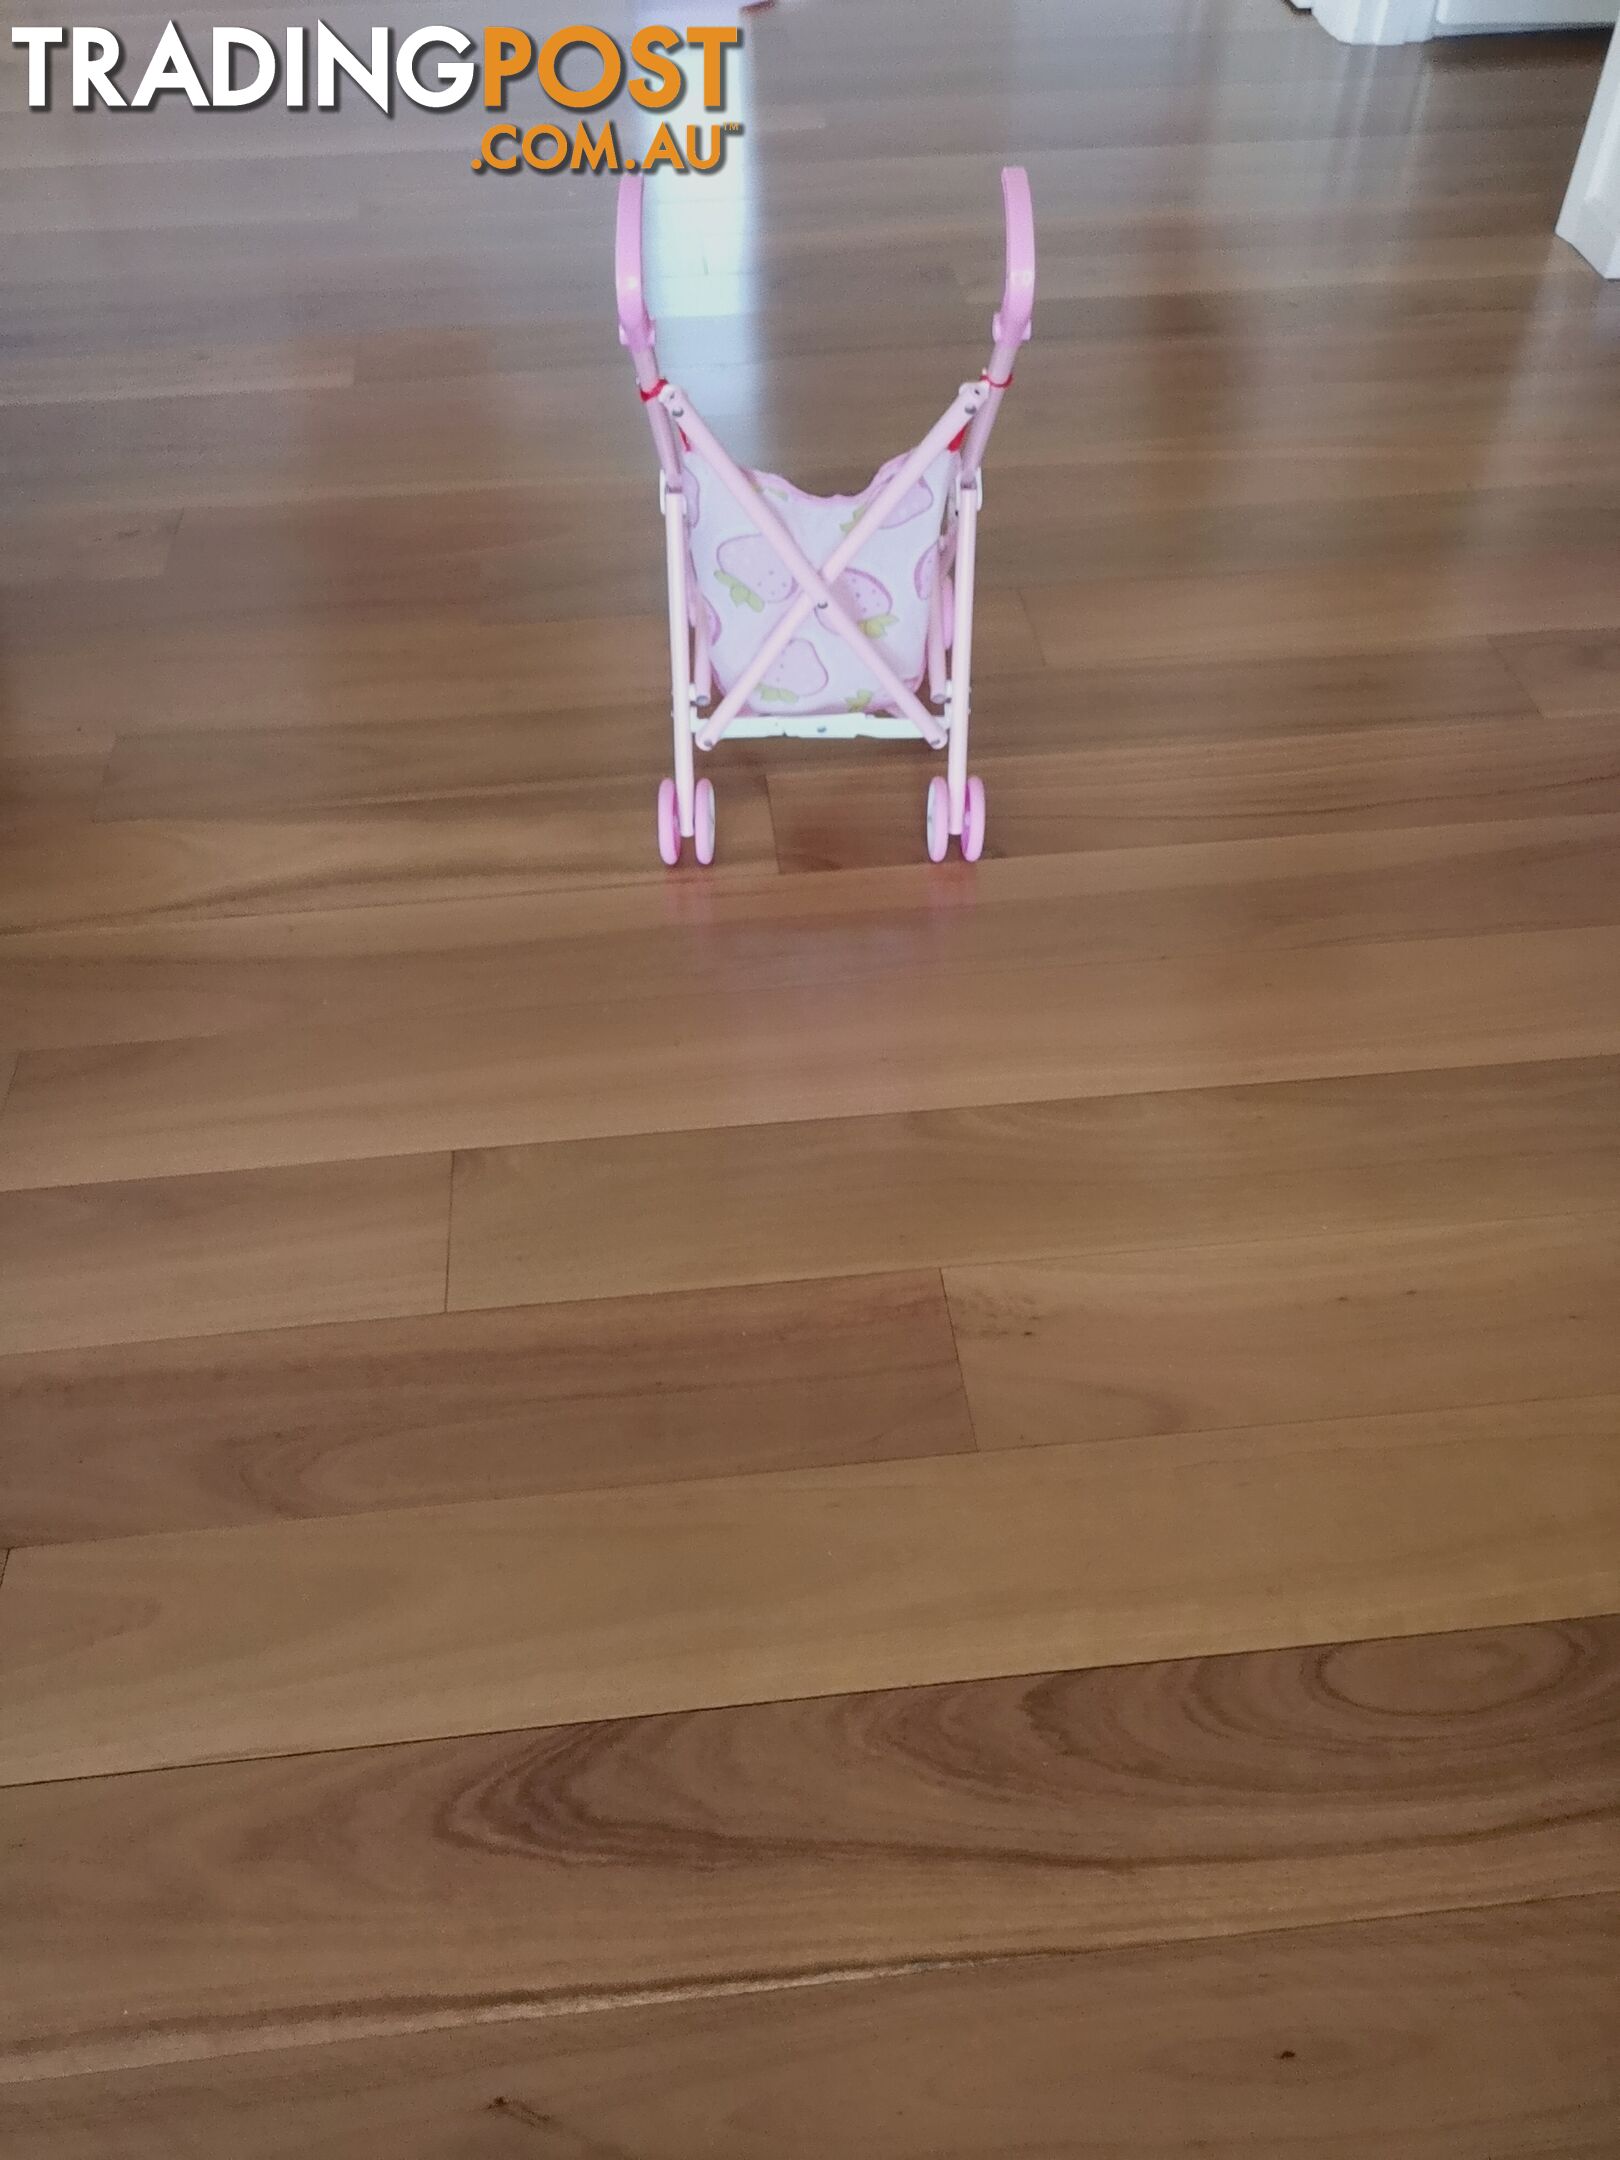 A pink toddler stroller is a favorite toy among little girls